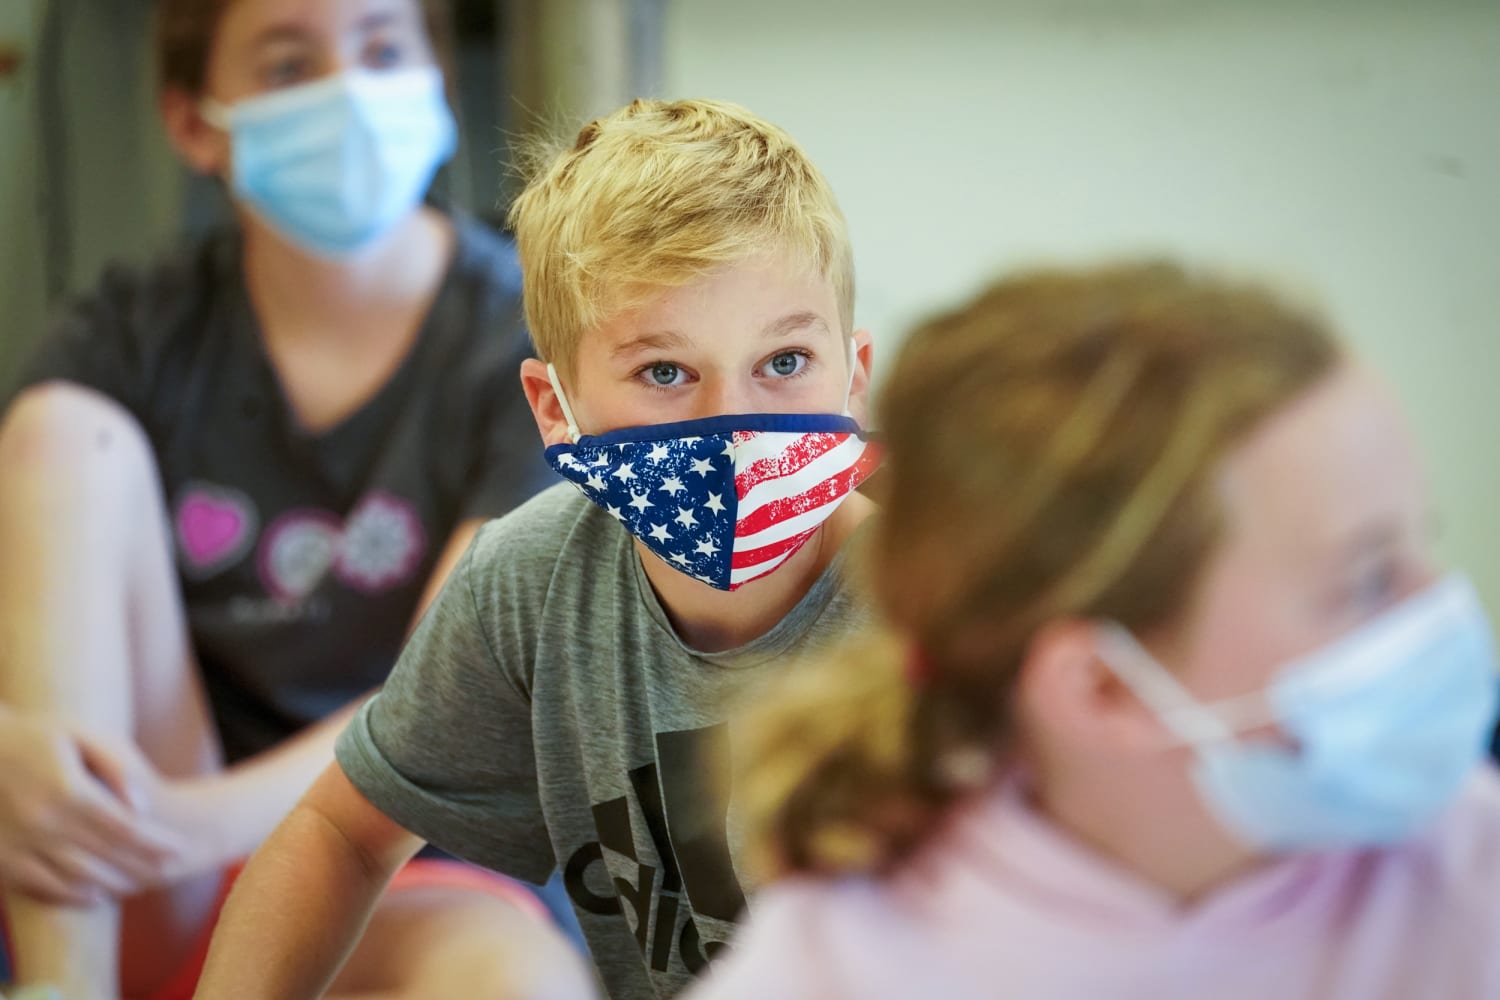 U.S. health officials say Americans shouldn't wear face masks to